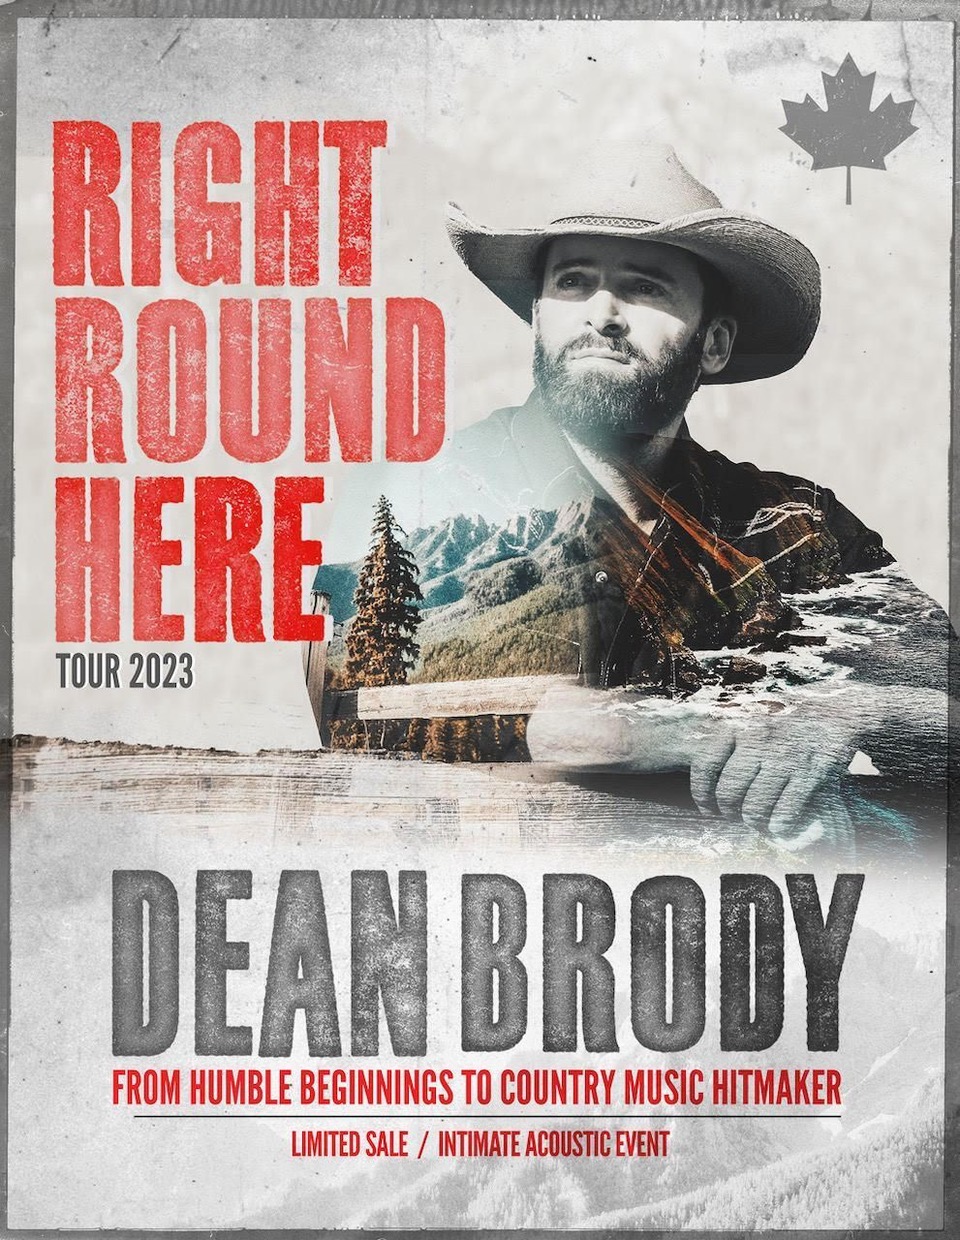 Dean Brody Announces Right Round Here Acoustic Tour